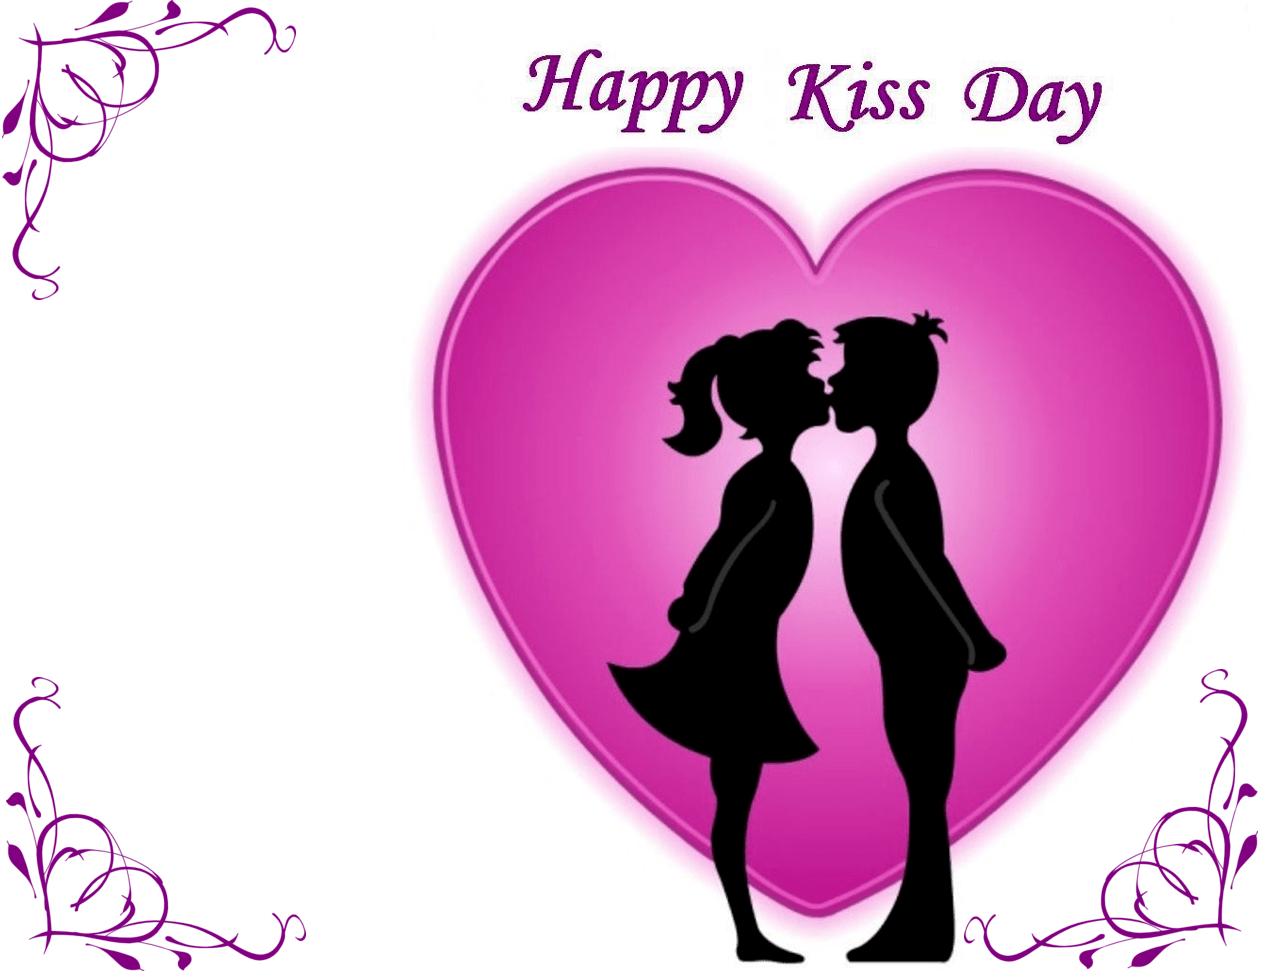 Happy Kiss Day Wallpapers - Wallpaper Cave